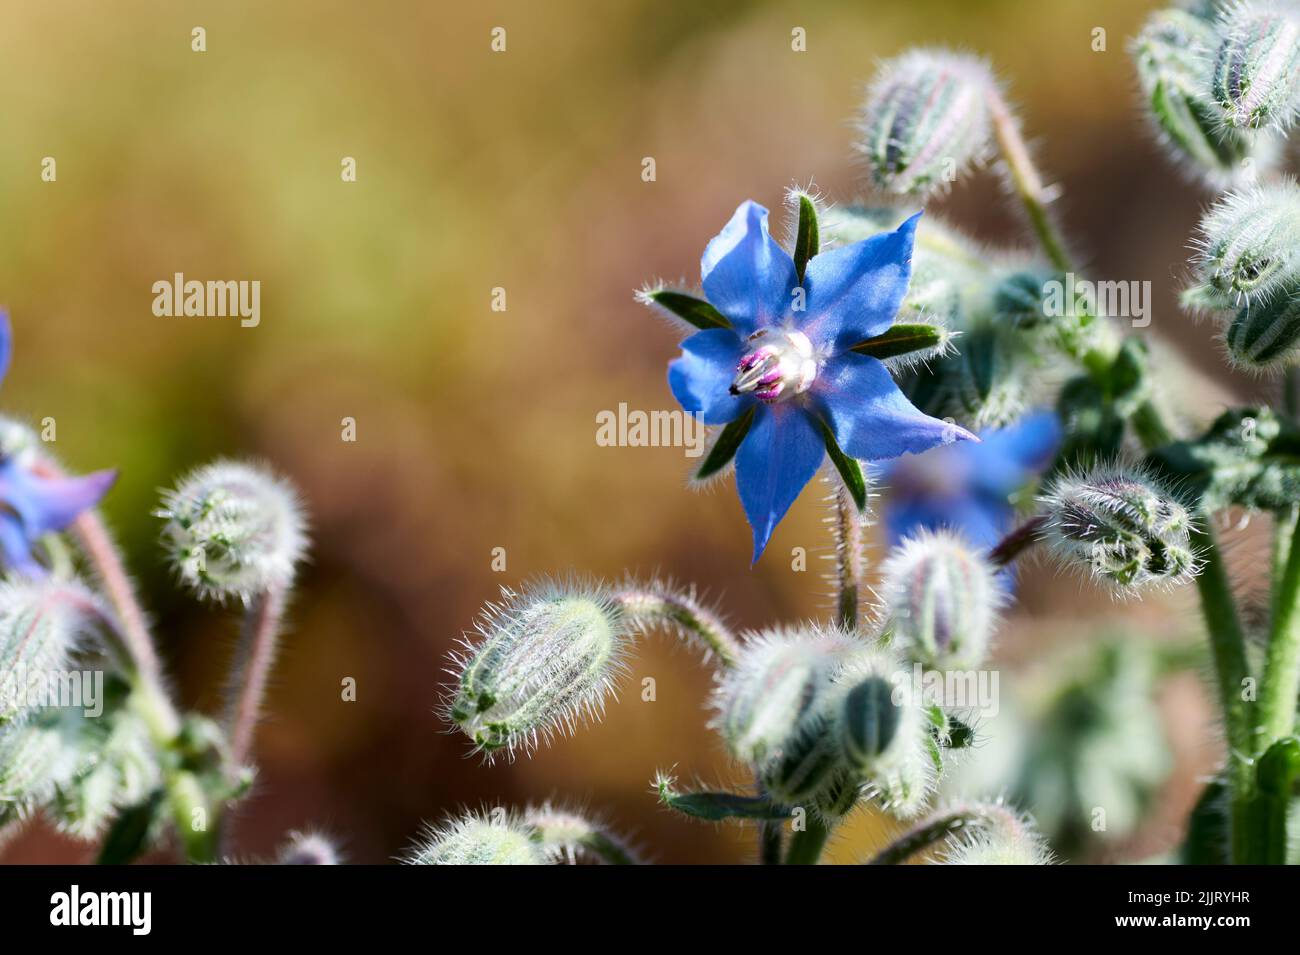 Borage Borago officinalis , also known as a starflower, is an annual herb in the flowering plant family Boraginaceae. Borretsch. One blossom and Stock Photo